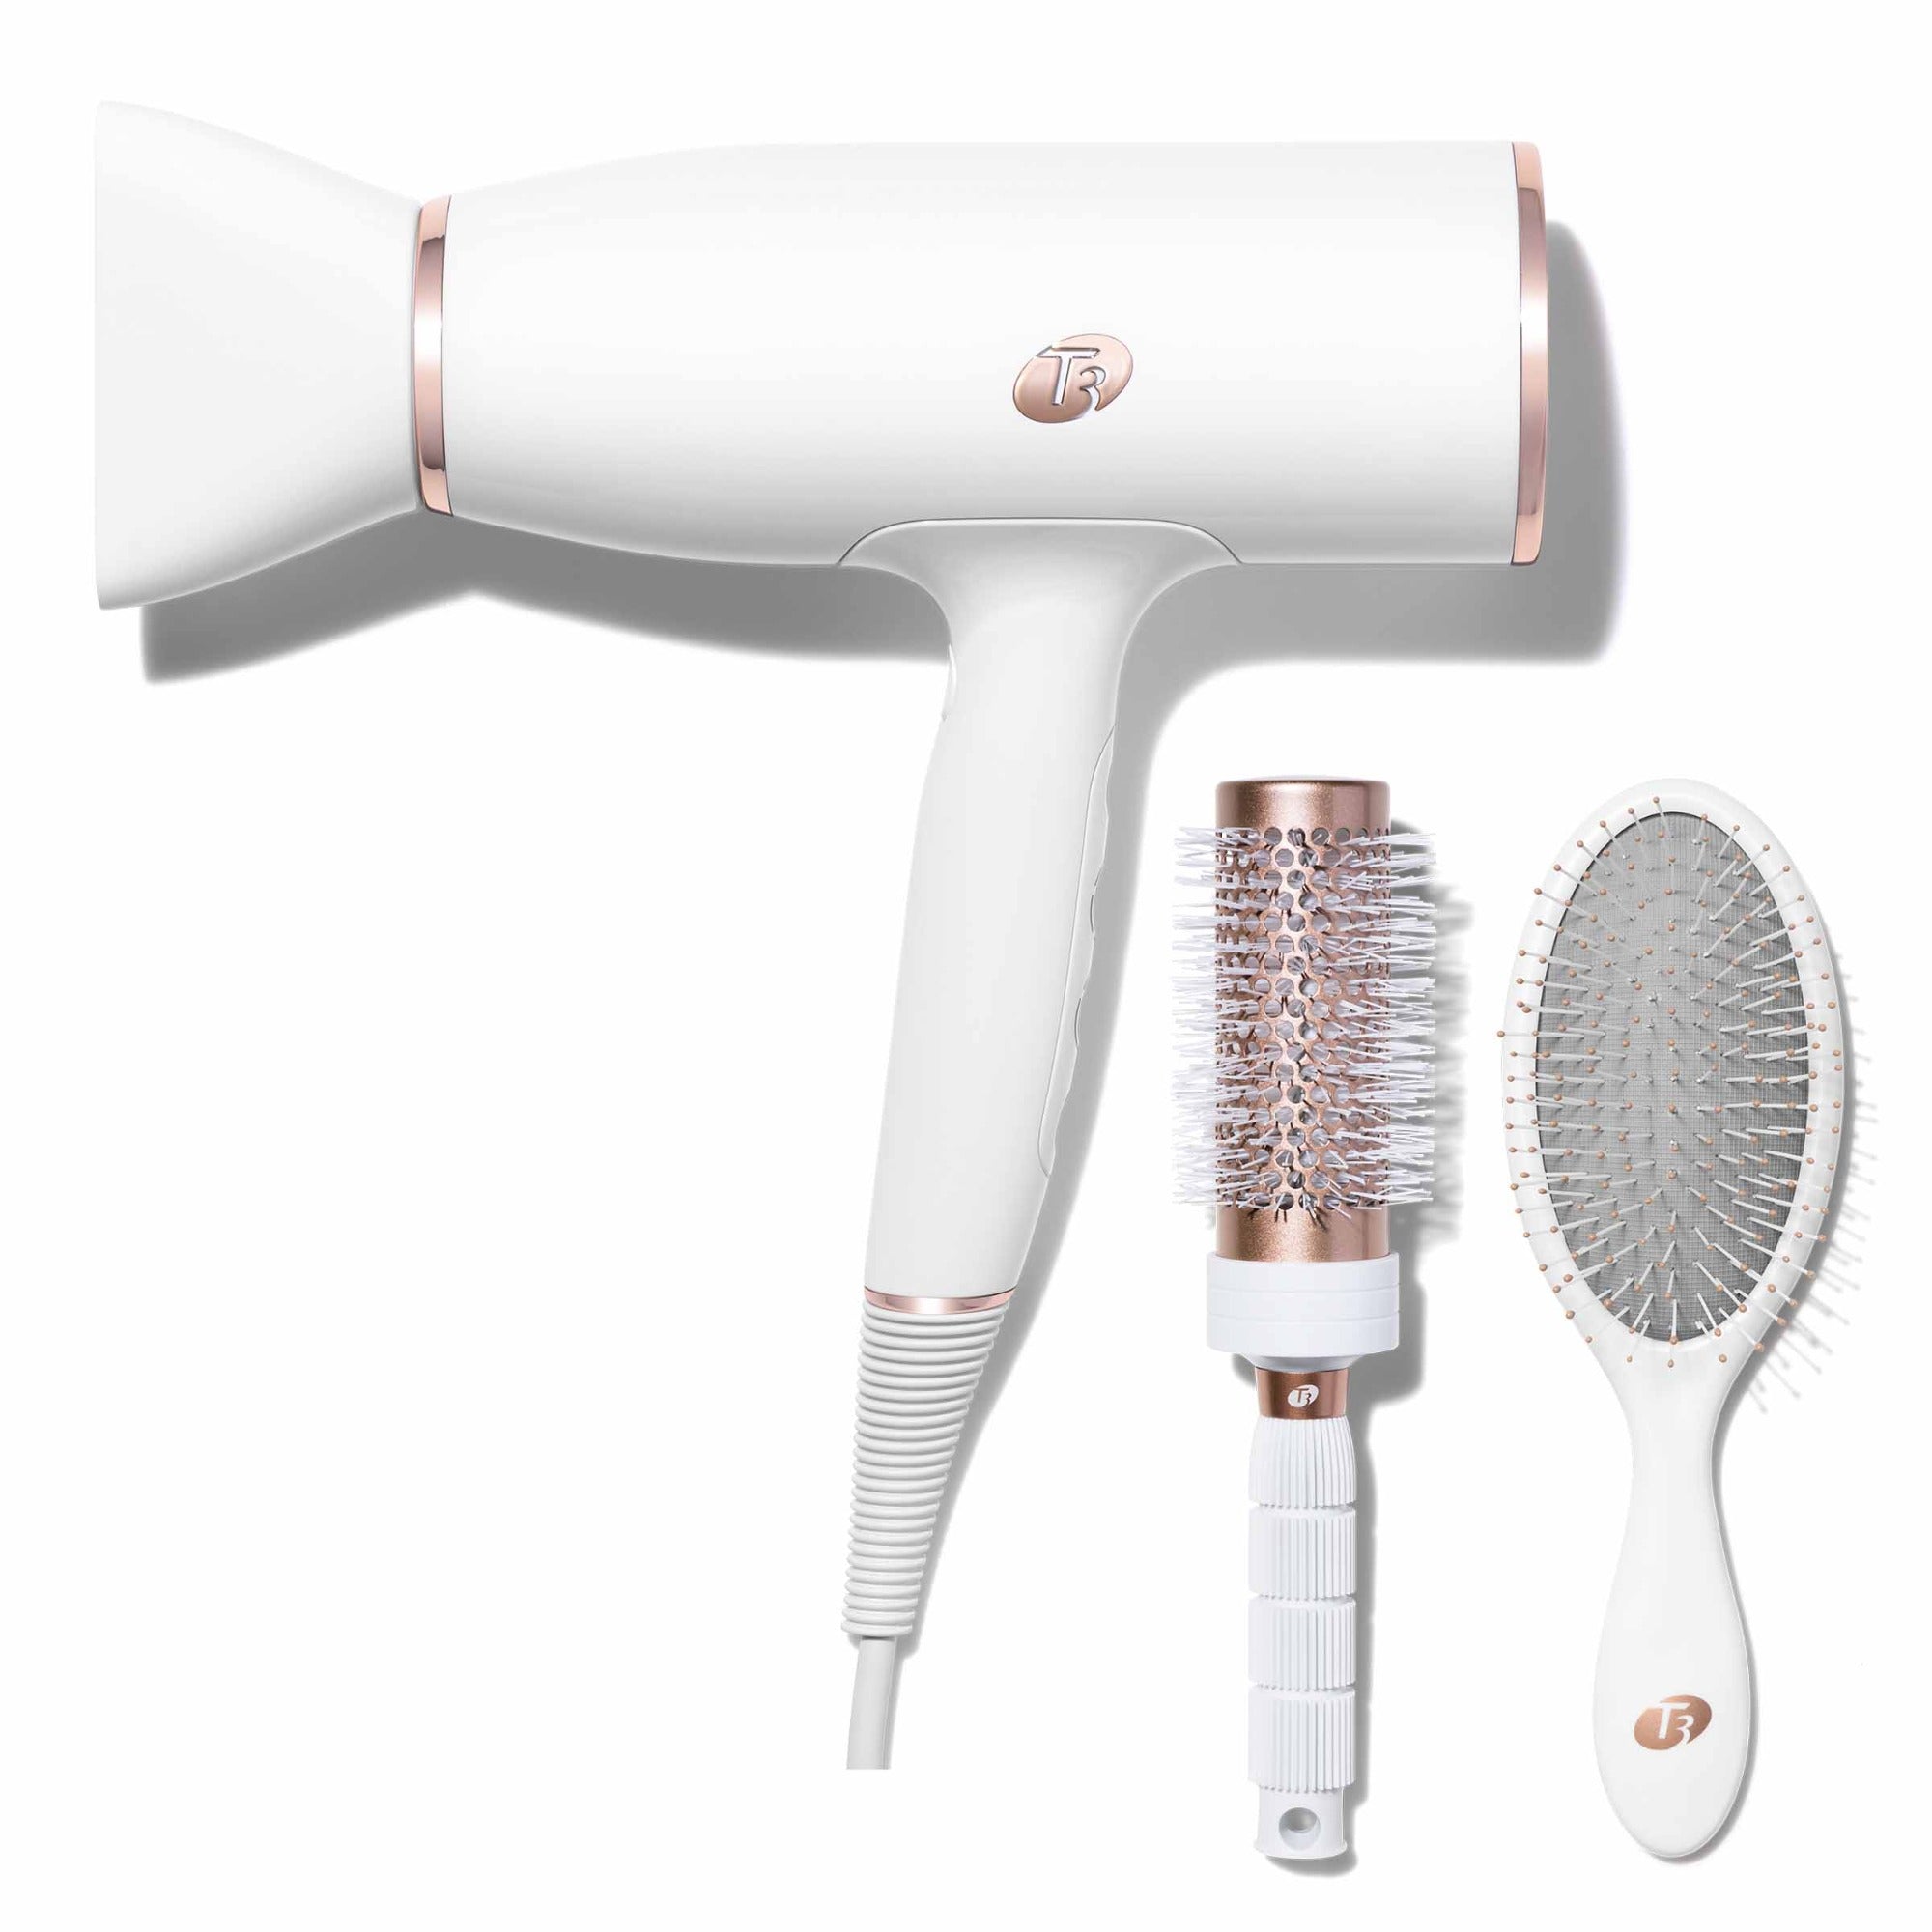 T3 AireLuxe hair dryer bundle with Volume 2.5 Round Brush and Detangle Brush